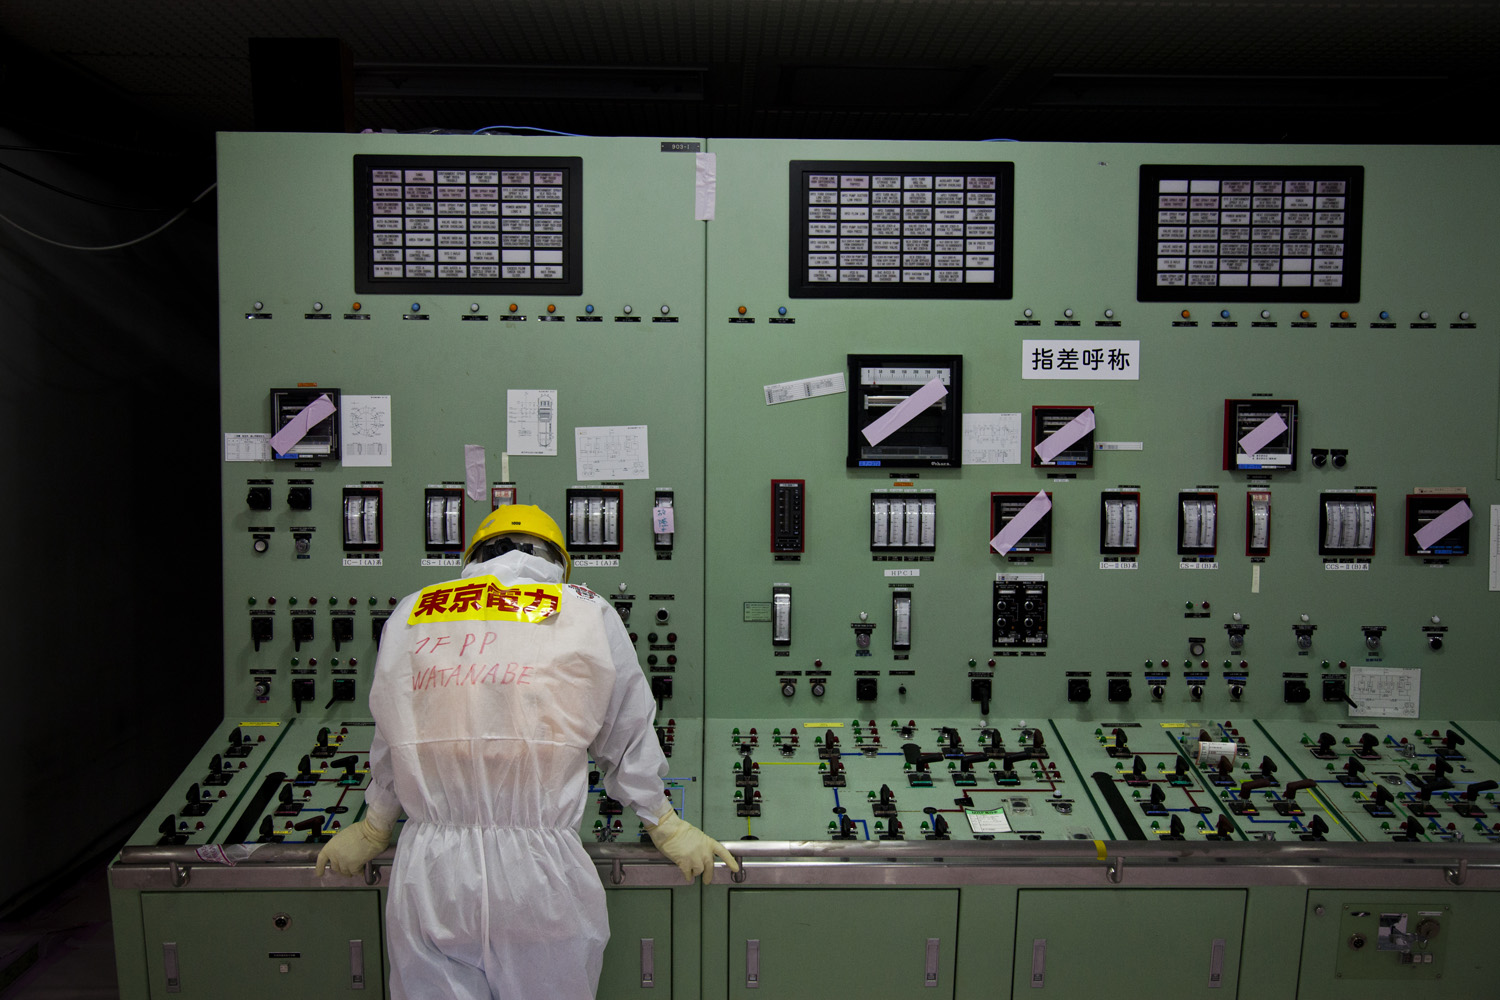 Japan, Okuma, 2014. A TEPCO worker stands inside the central control room of reactor 1 and 2. Both reactors overheated, causing meltdowns. The melt down in reactor 1 eventually led to a hydrogen explosion that released large amounts of radioactive material in the air.